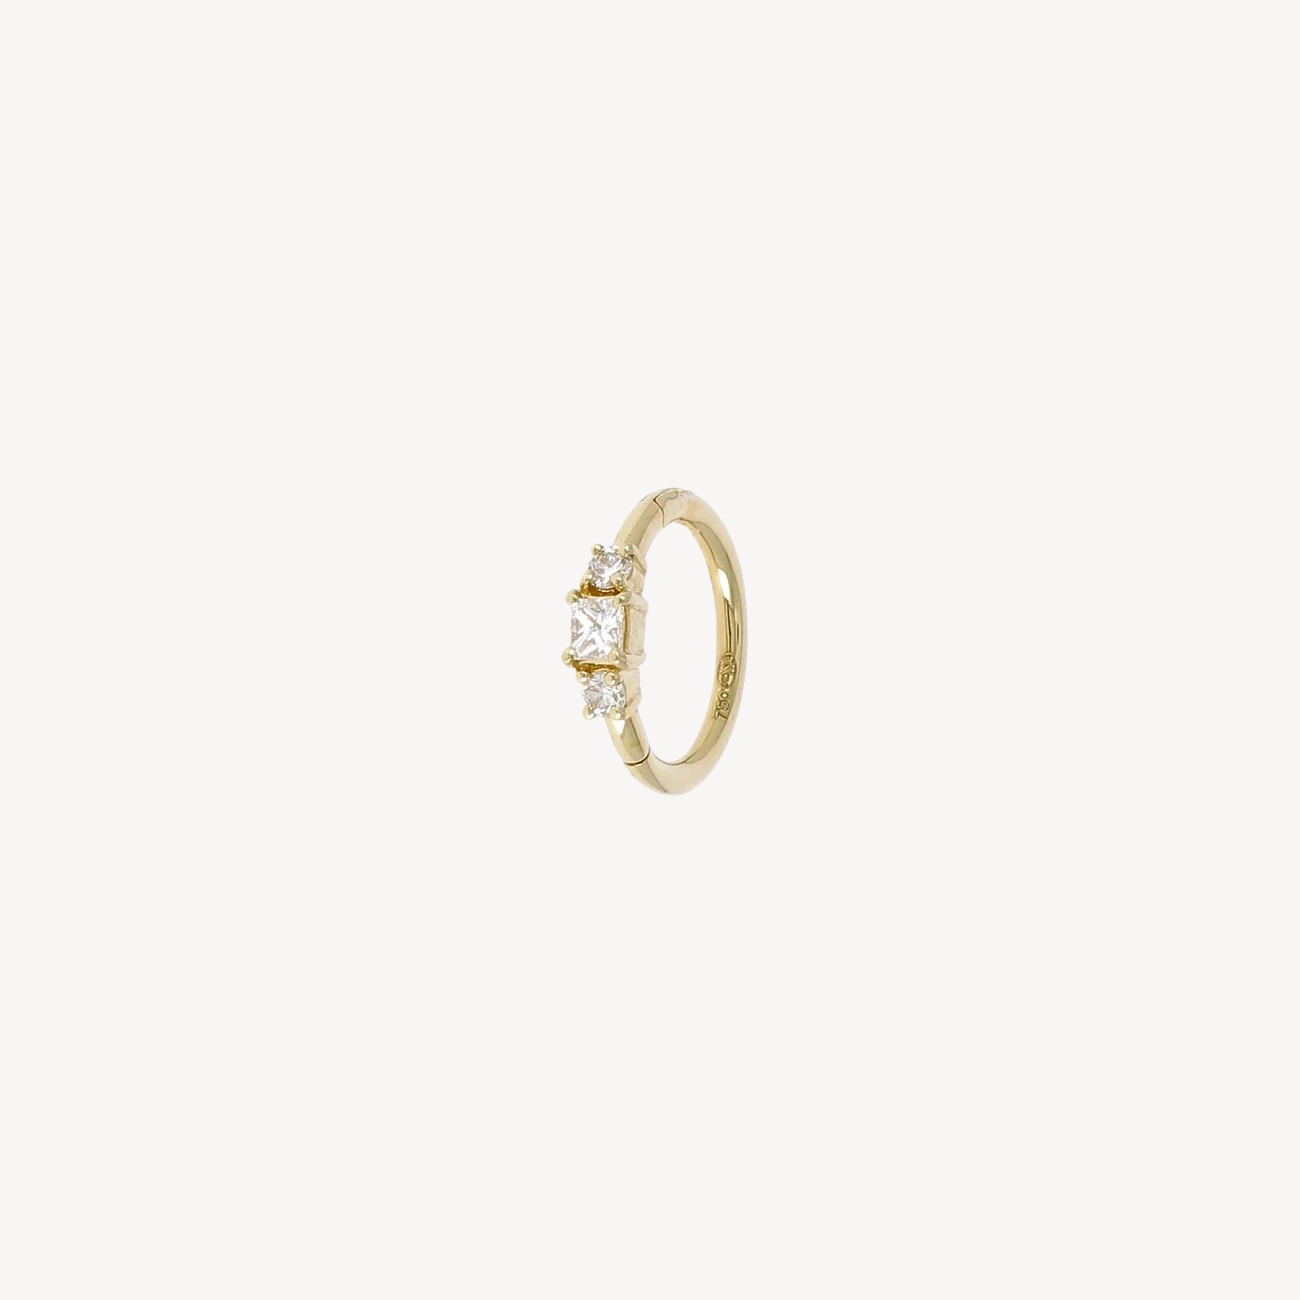 8mm Rose Gold and Diamonds 2x2mm Hoop